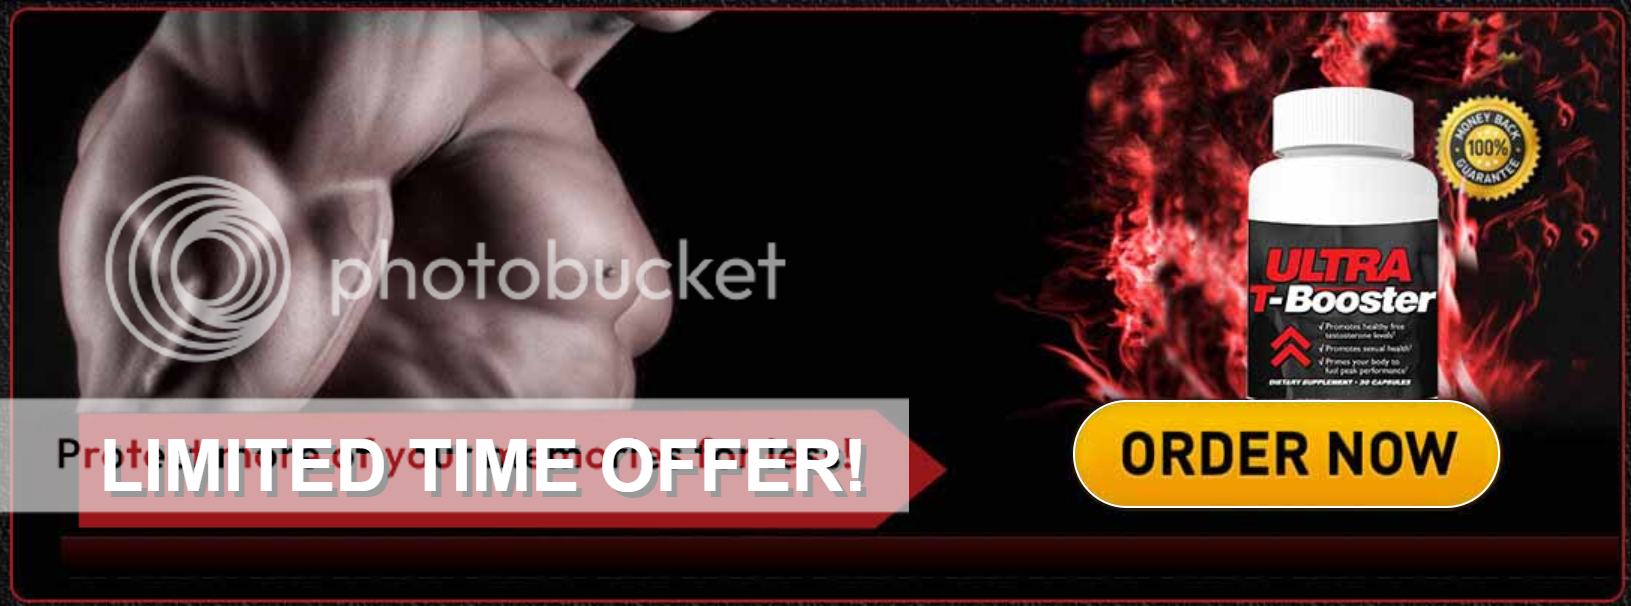 ultra t-booster buy now